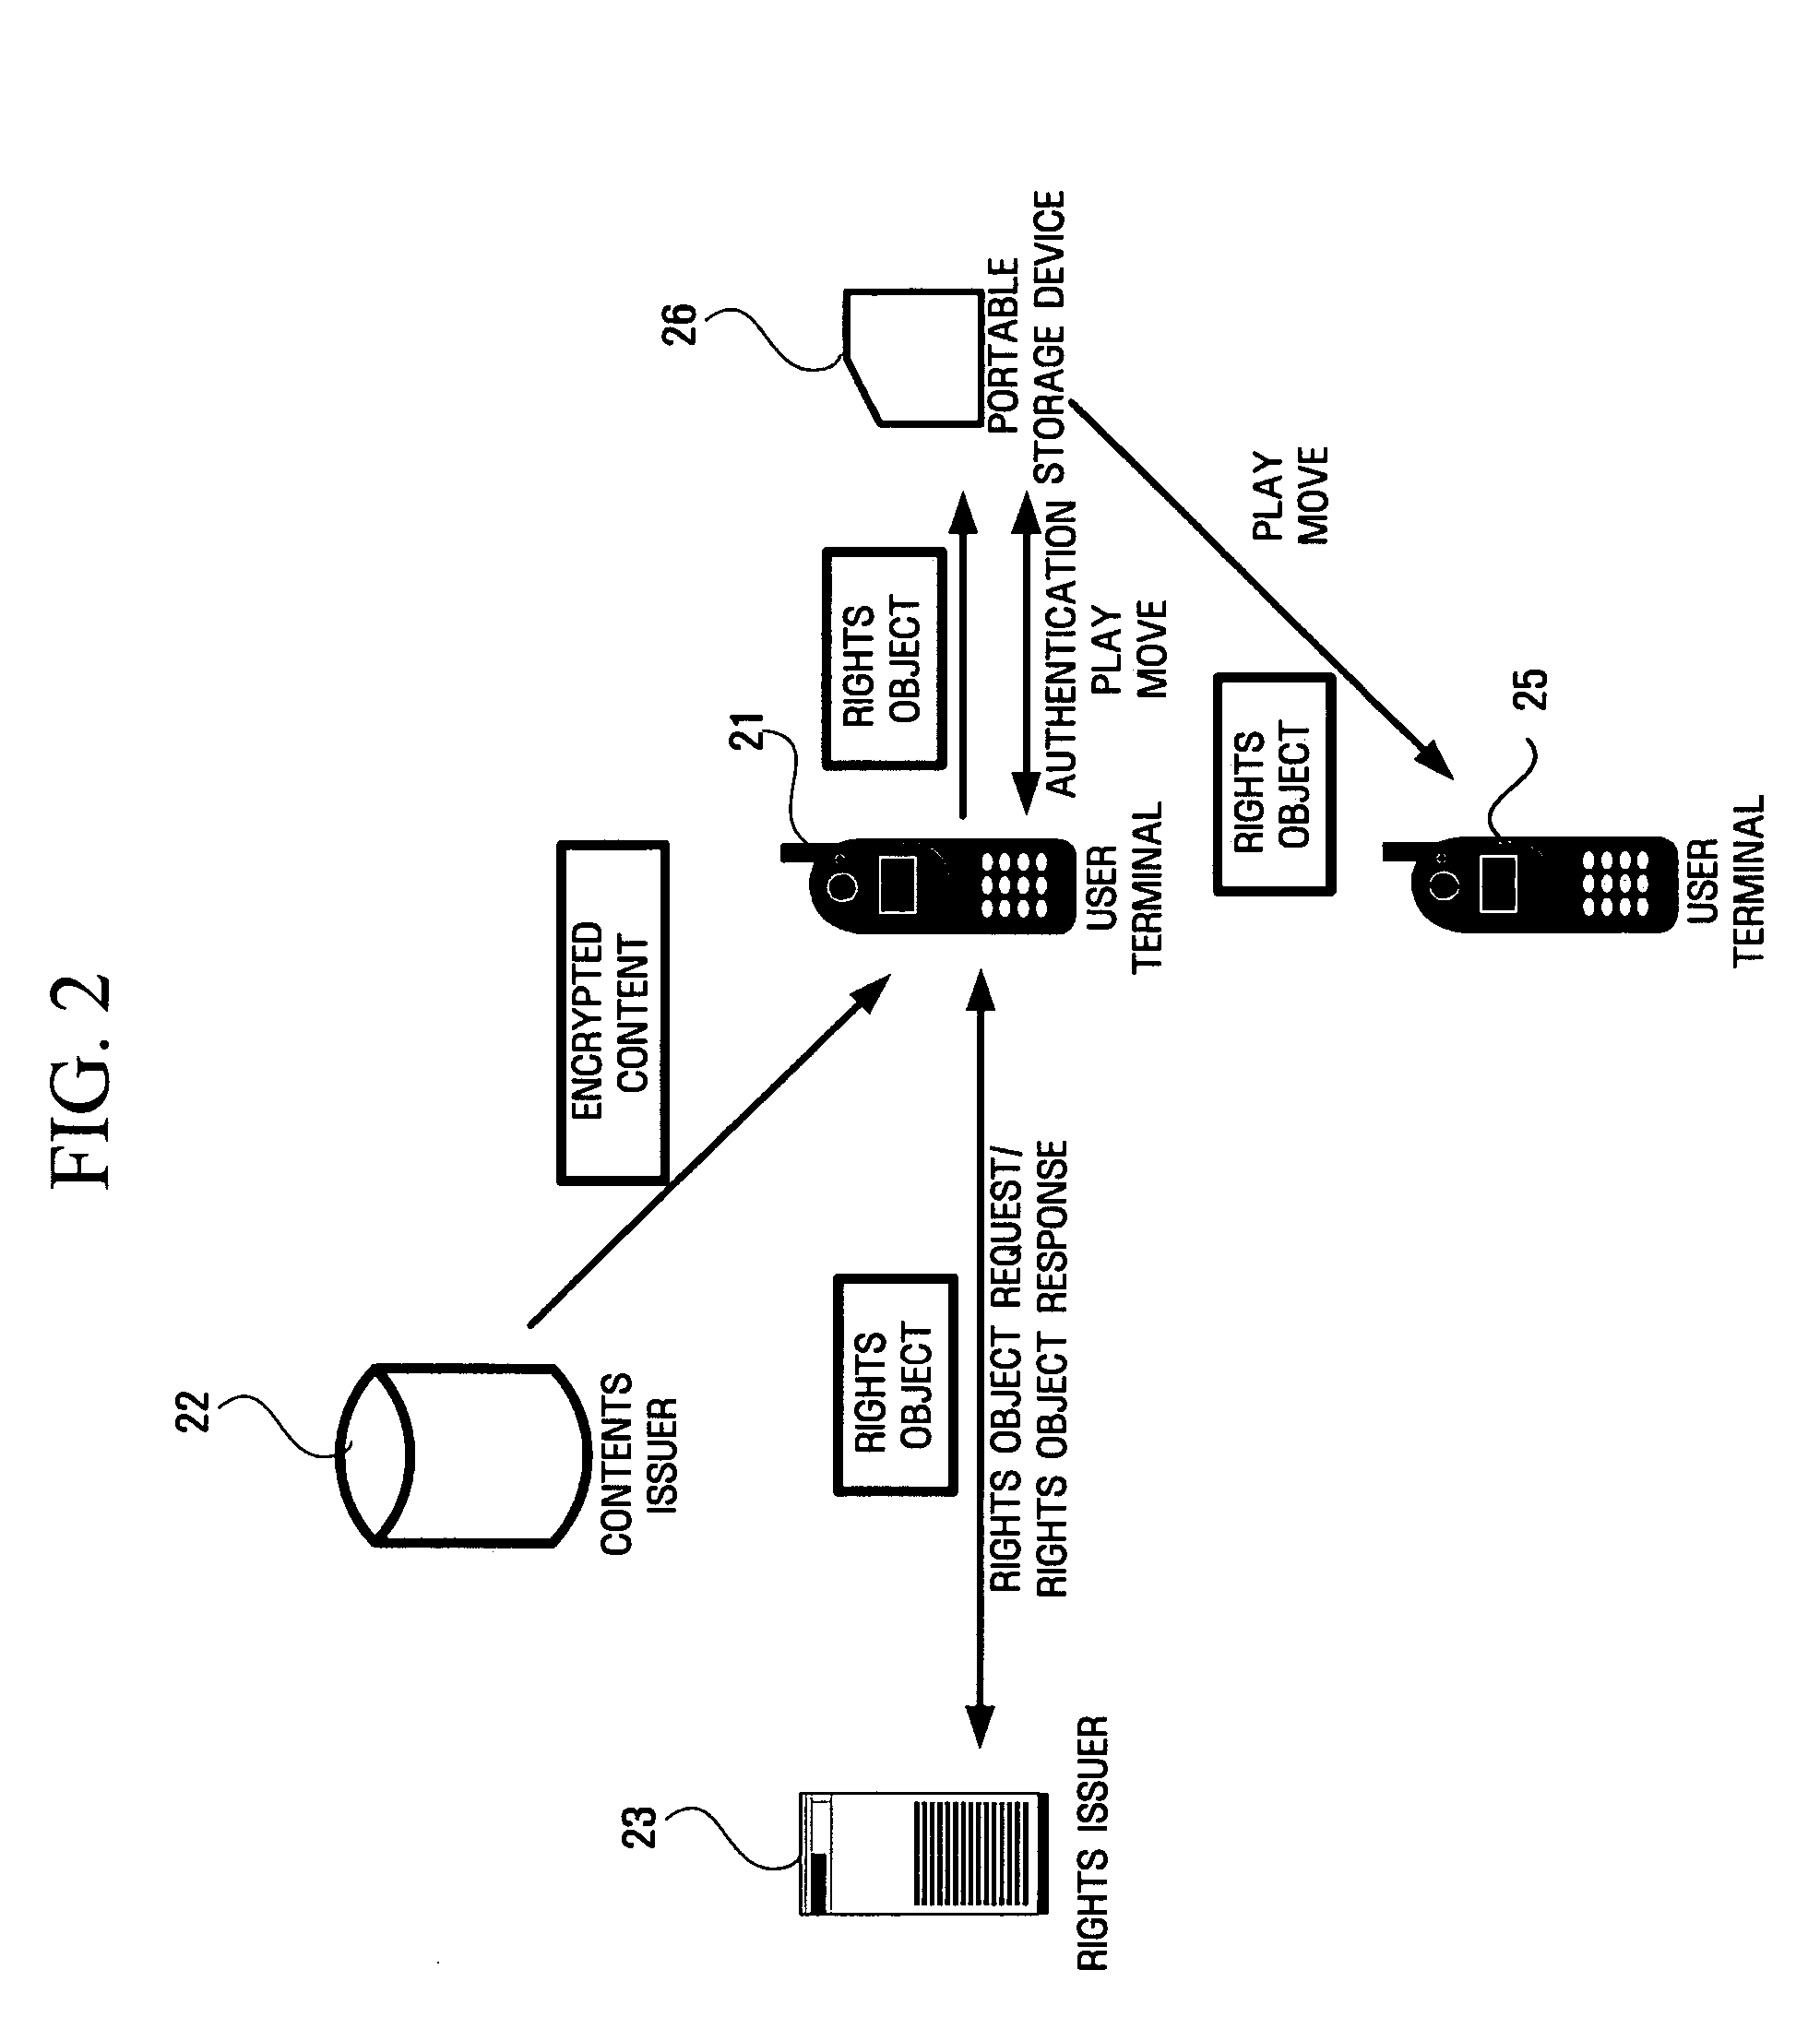 Digital rights management structure, portable storage device, and contents management method using the portable storage device